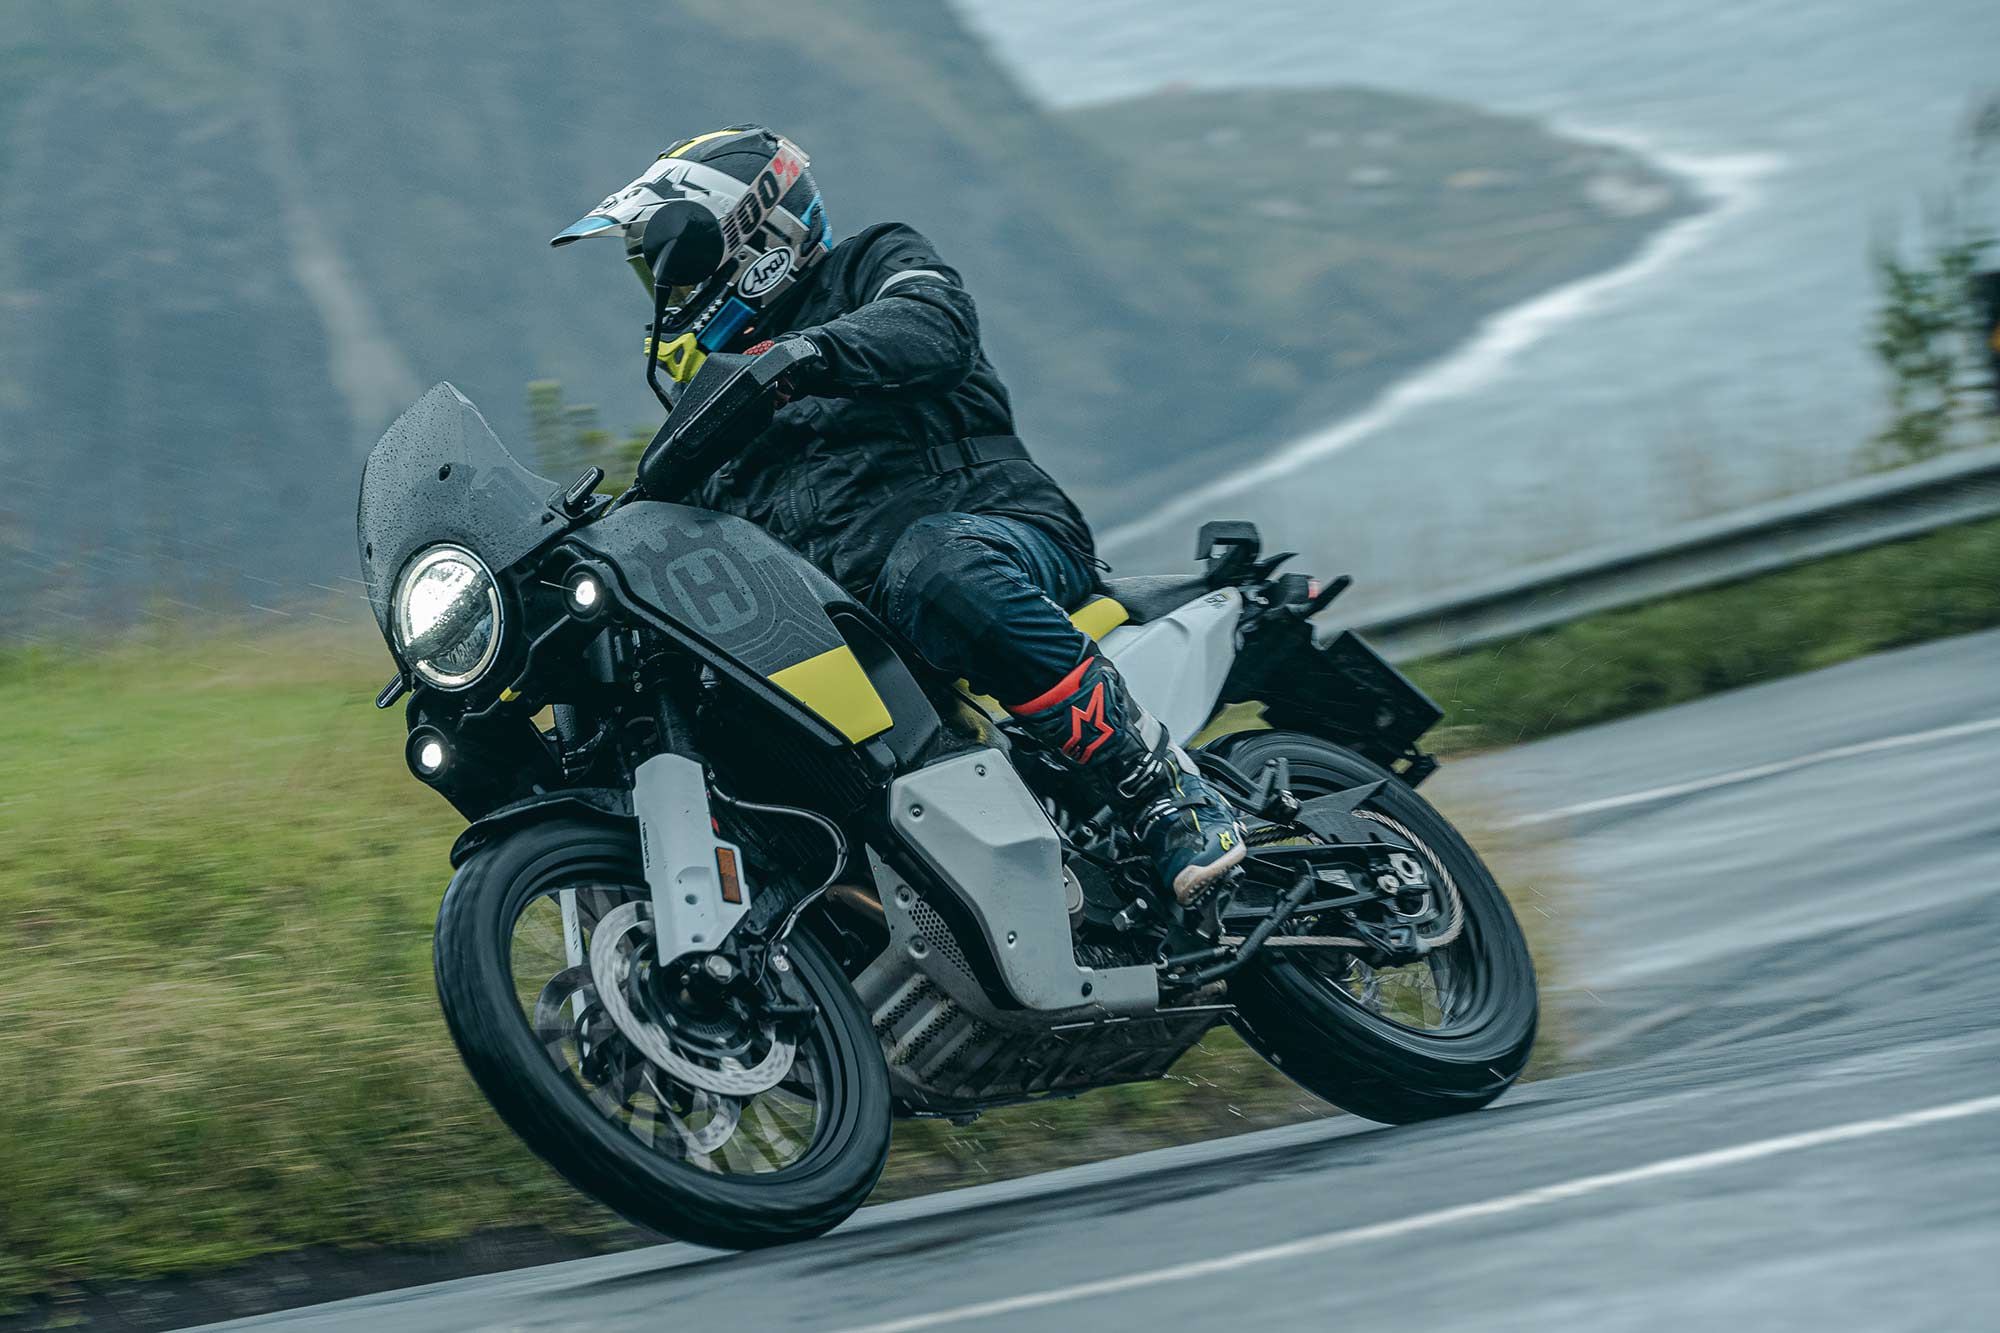 Lean-sensitive traction control and ABS keep the Norden moving forward in inclement weather.